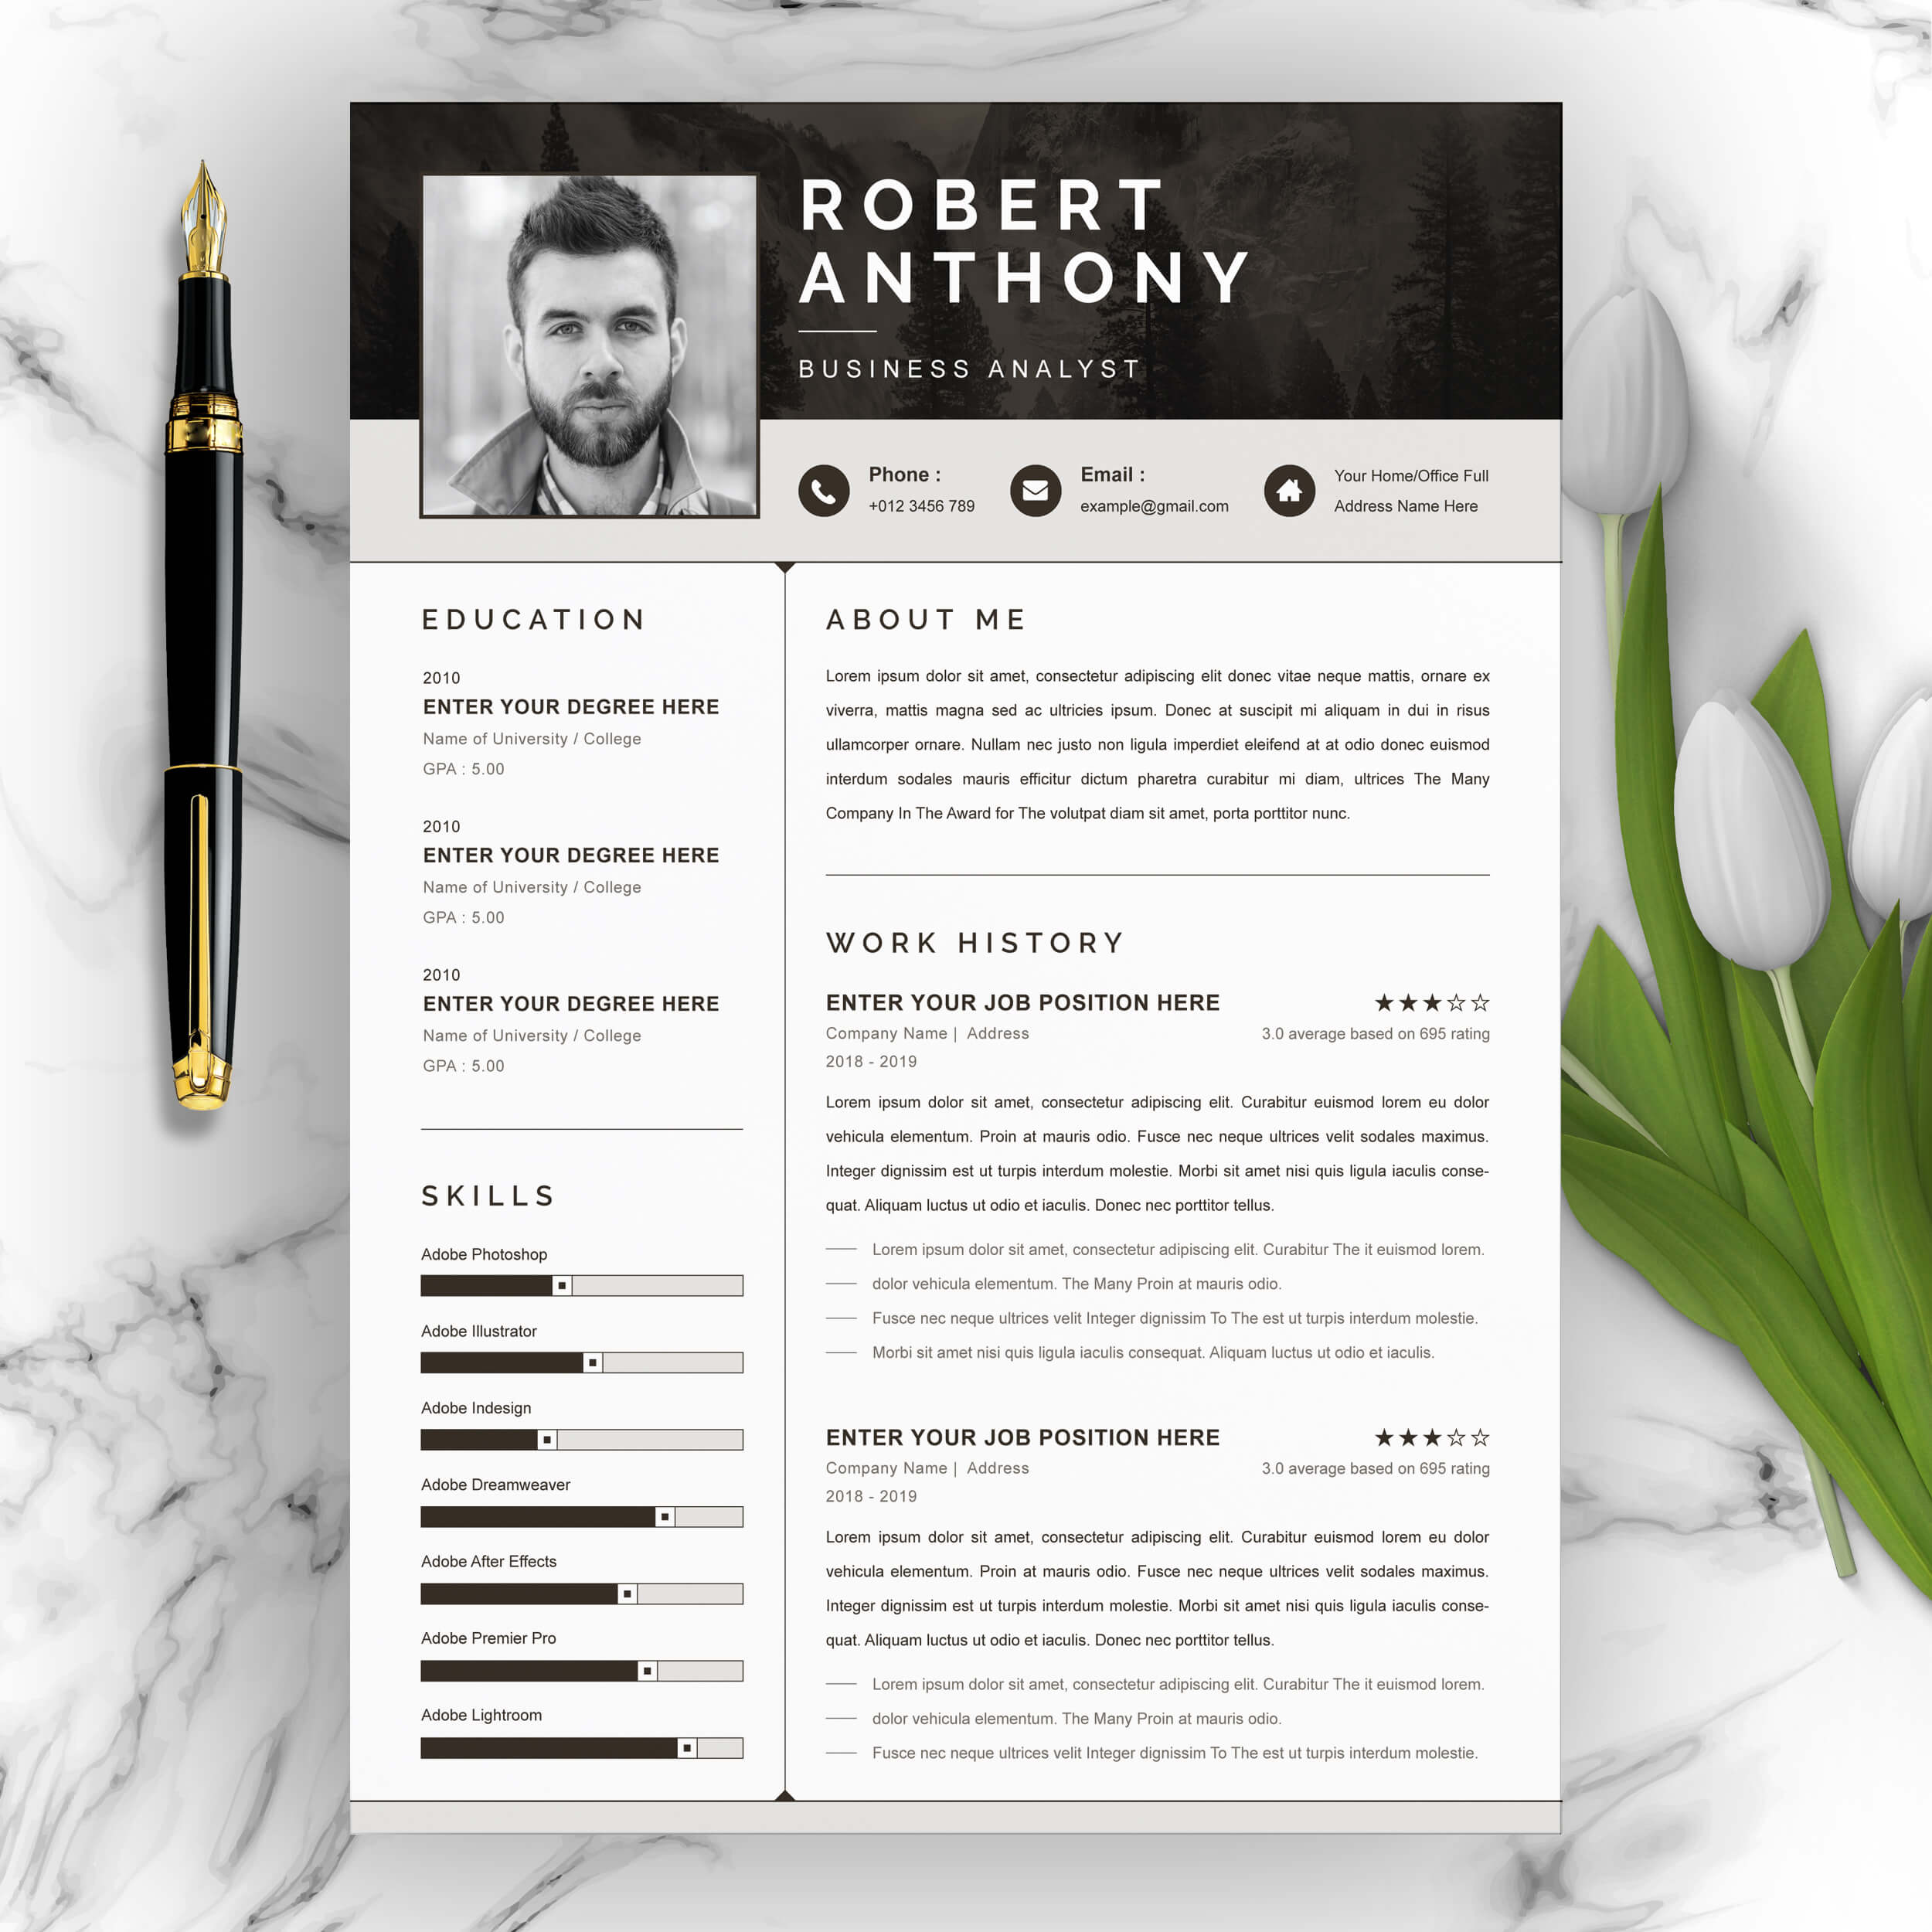 Business Analyst Resume Template | Resume Template in Word PSD Format cover image.